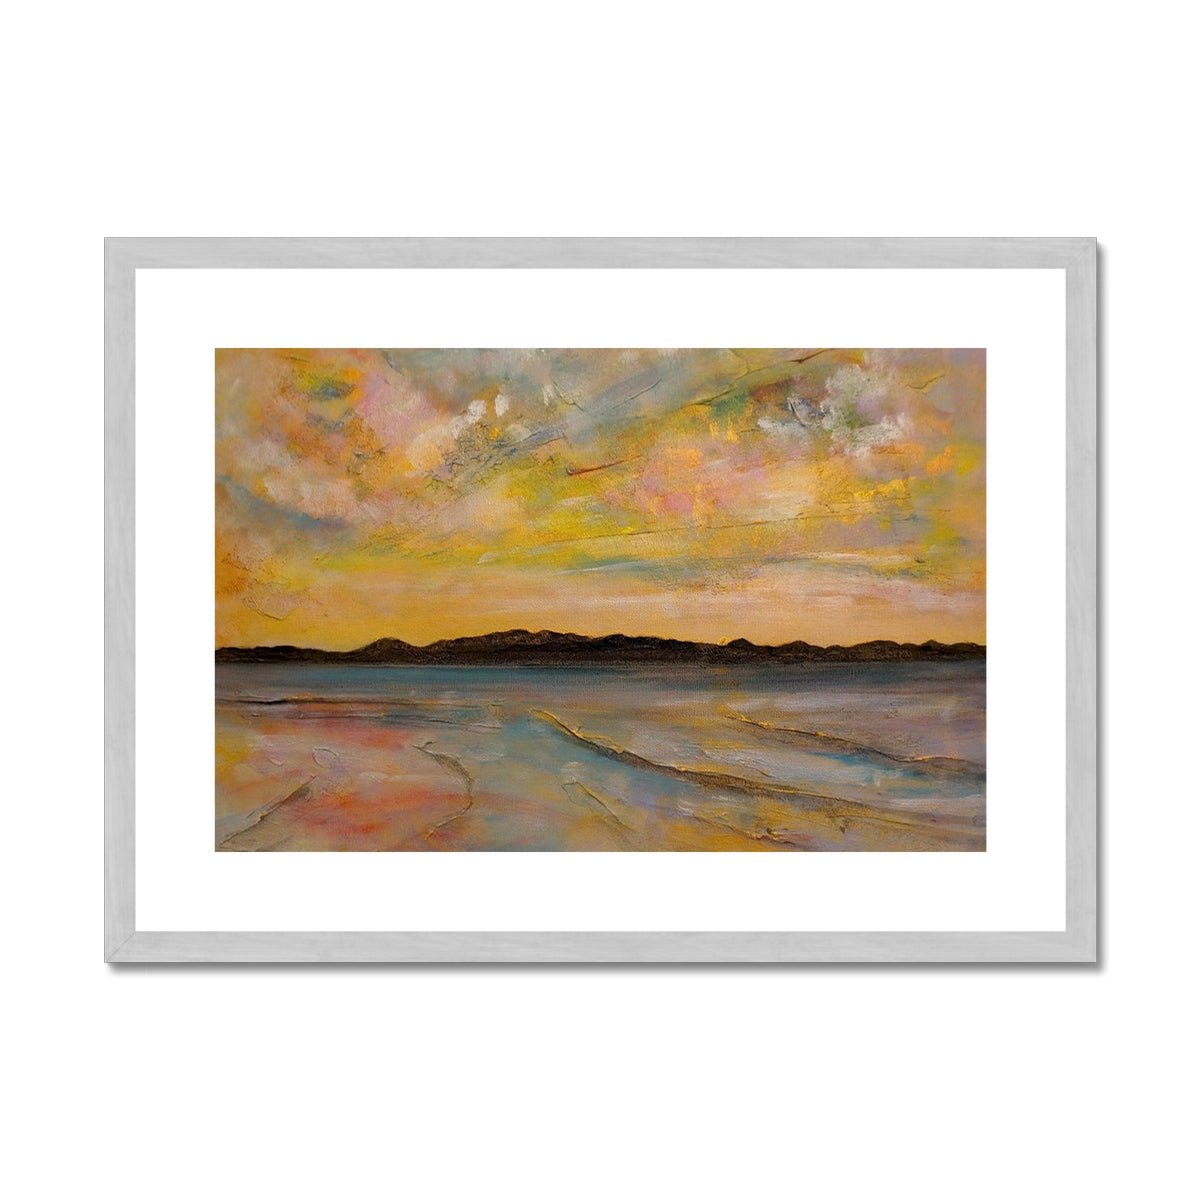 Vallay Island North Uist Painting | Antique Framed & Mounted Prints From Scotland-Antique Framed & Mounted Prints-Hebridean Islands Art Gallery-A2 Landscape-Silver Frame-Paintings, Prints, Homeware, Art Gifts From Scotland By Scottish Artist Kevin Hunter